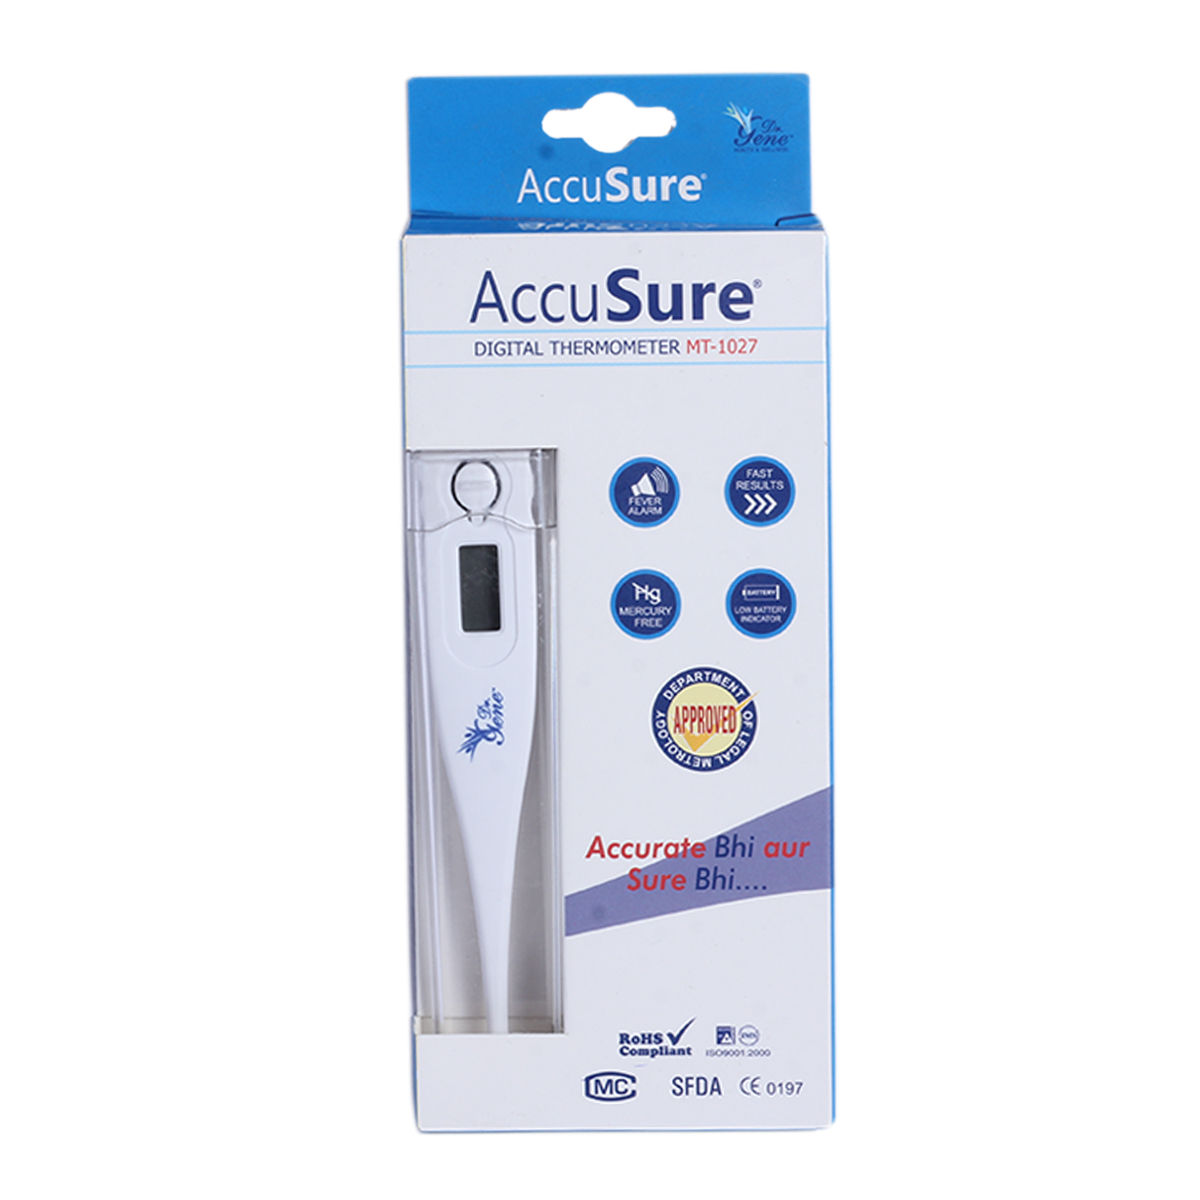 Buy Accusure Digital Thermometer MT-1027 (Microgene), 1 Count Online